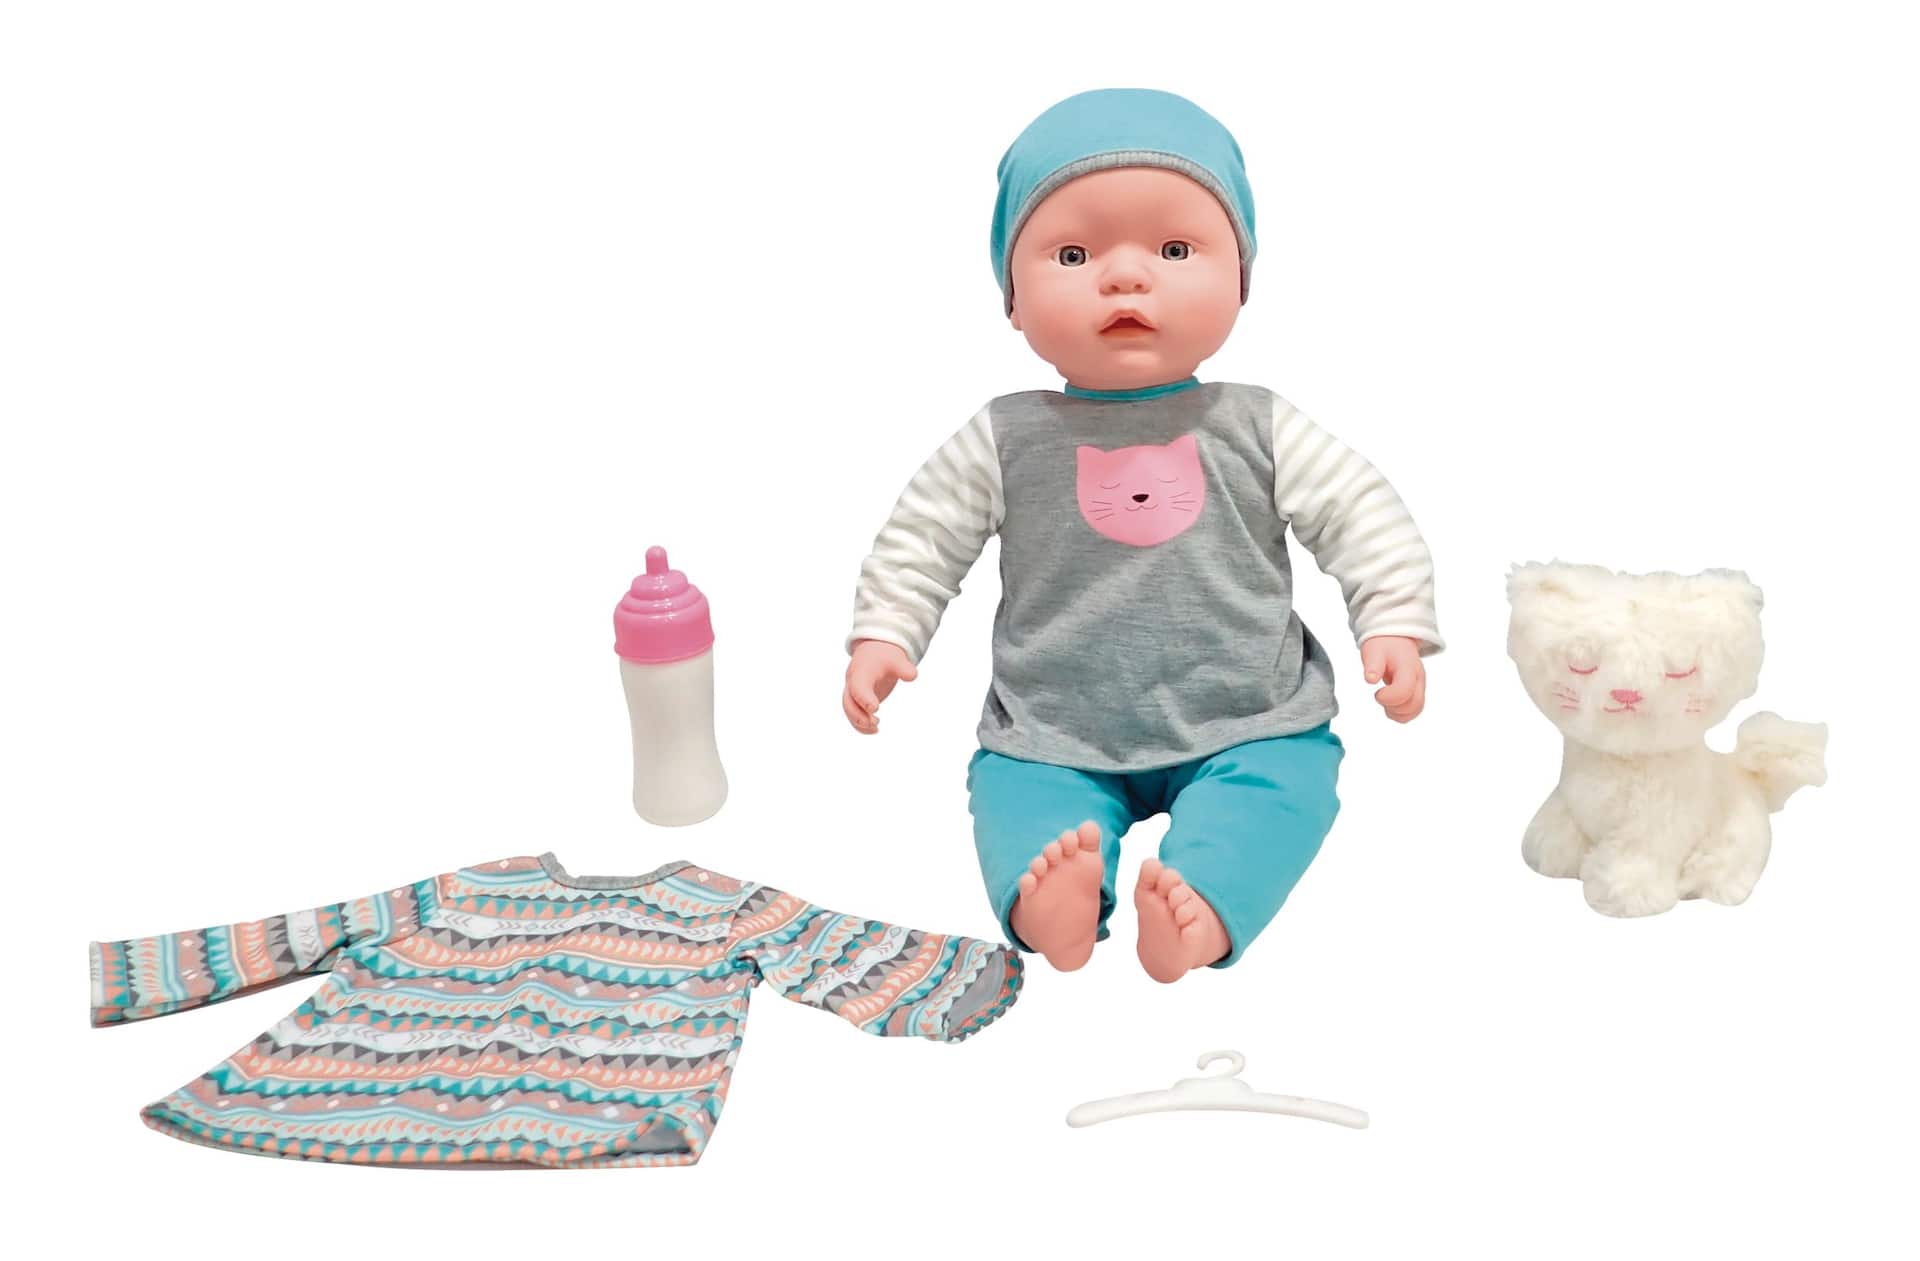  Smart Novelty Baby Doll Bathtub Set with Working Shower Head -  Doll Comes with Accessories for Bath Time - Pretend Play Toy Doll Bathing  Set Great Gift for Kids and Toddlers 